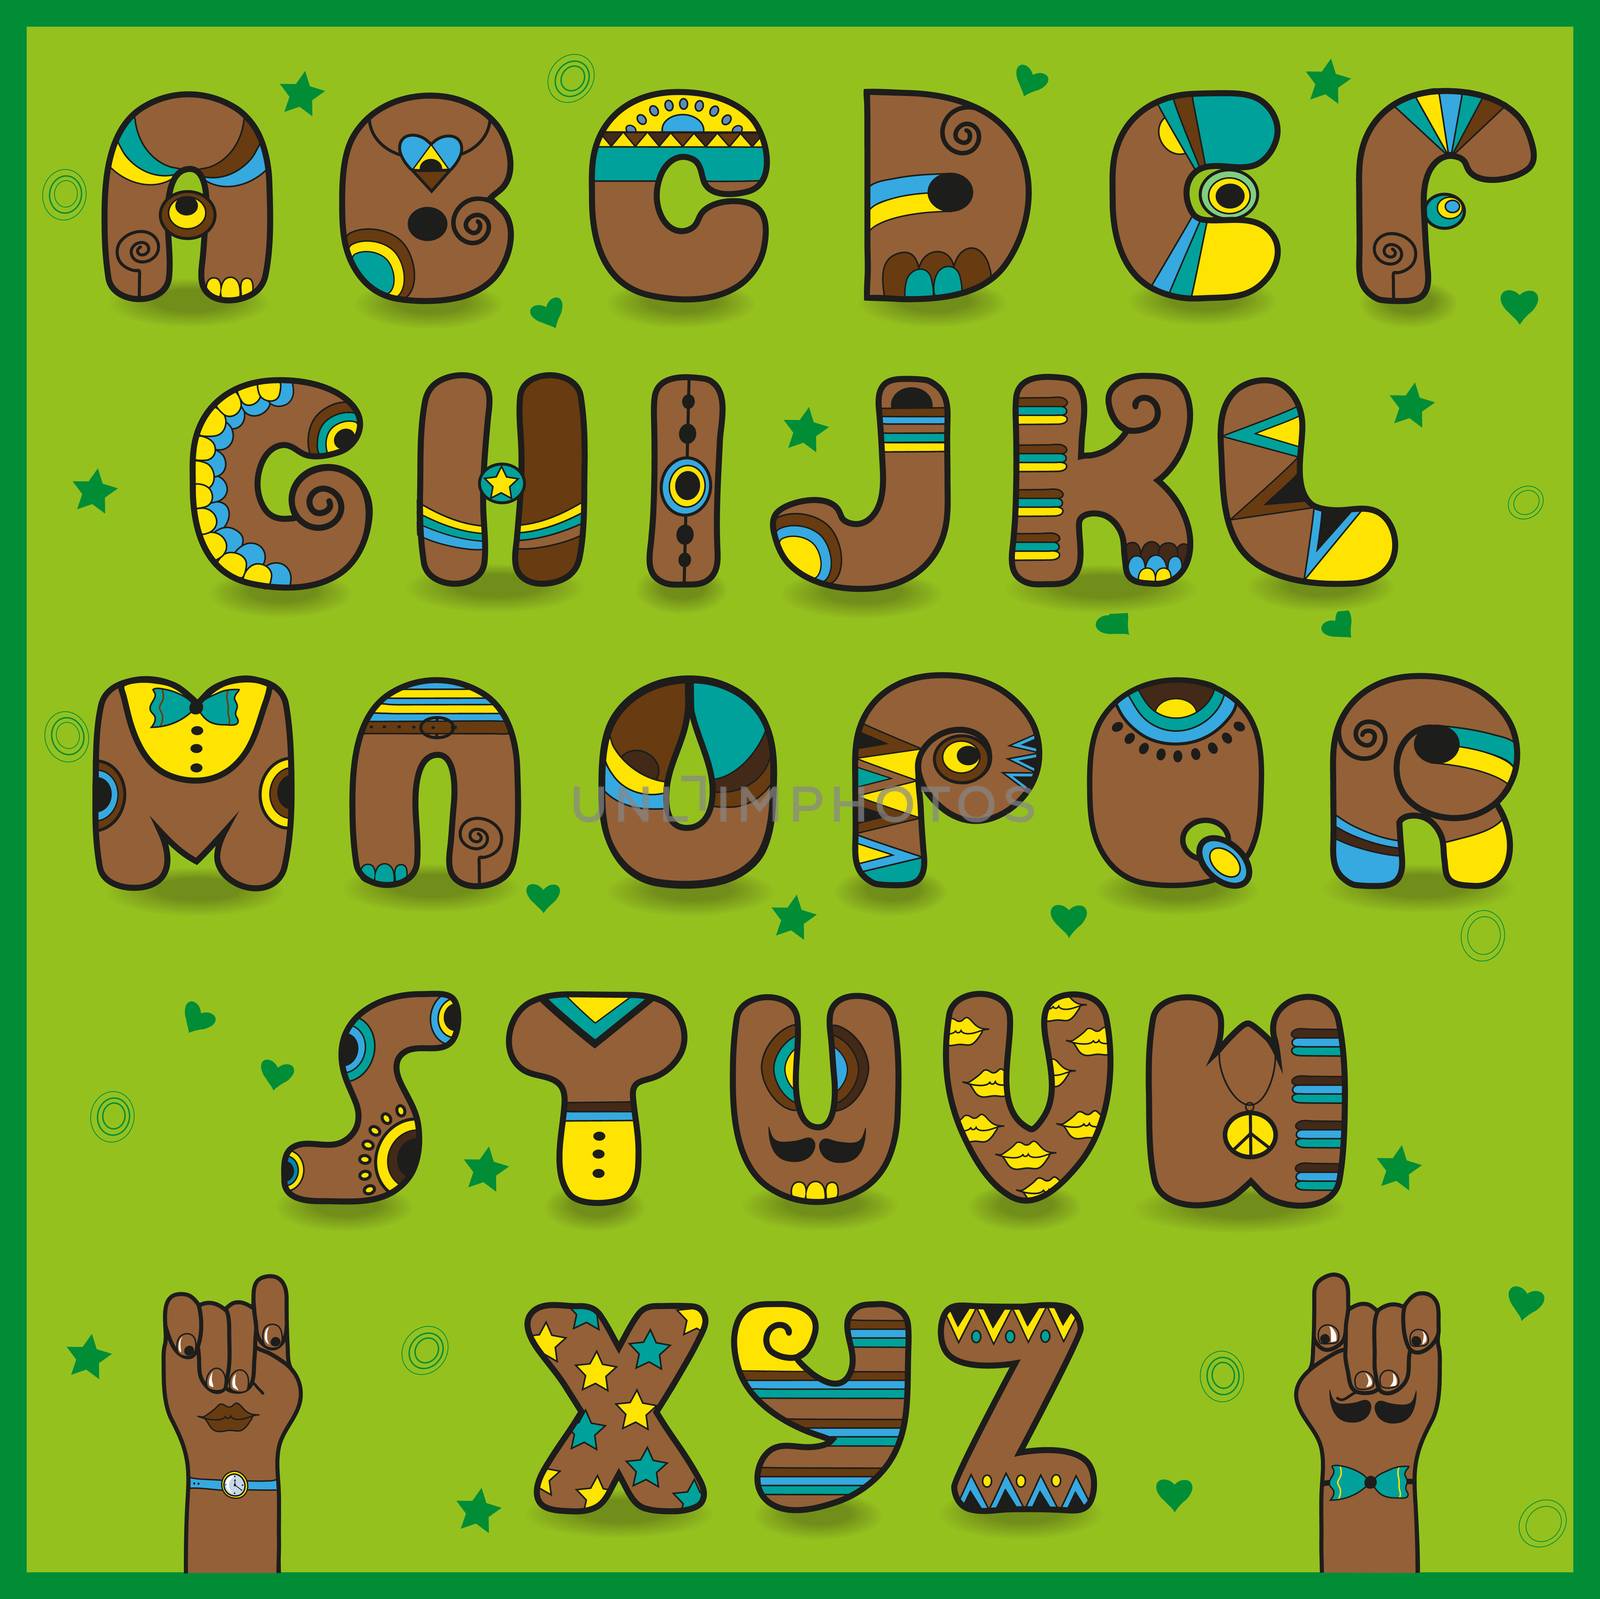 Chocolate Alphabet. Funny brown letters with bright yellow and blue parts. Illustration